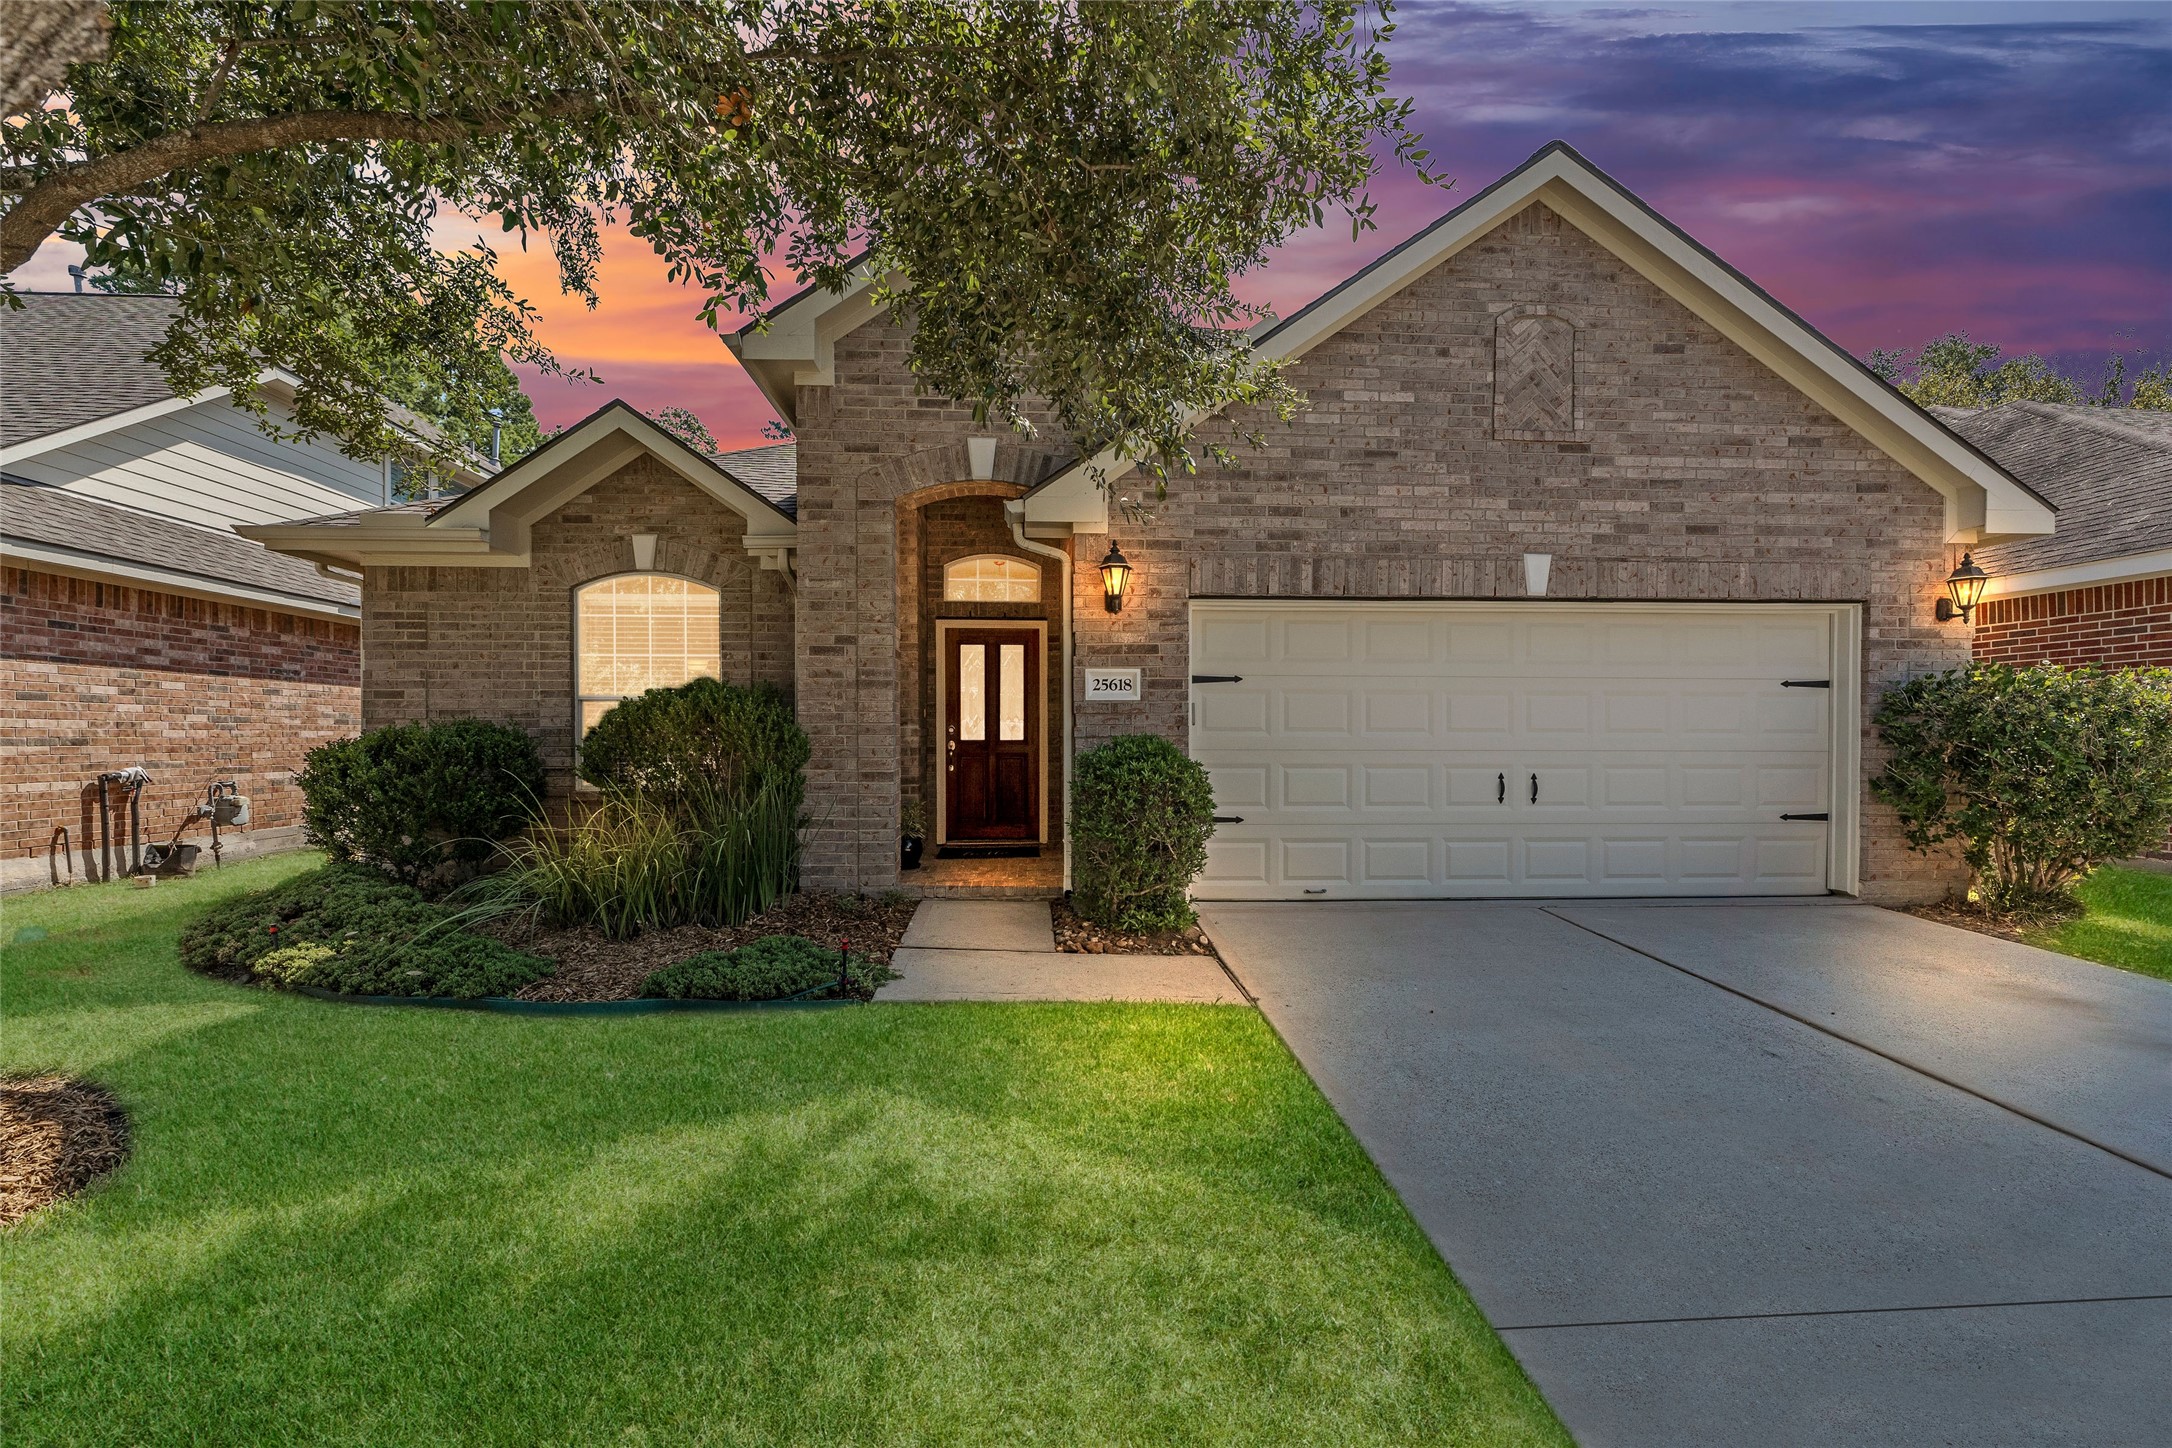 Experience peaceful living with convenient access to all the amenities you want! Zoned to the highly acclaimed Tomball ISD! Low tax rate of 2.67%